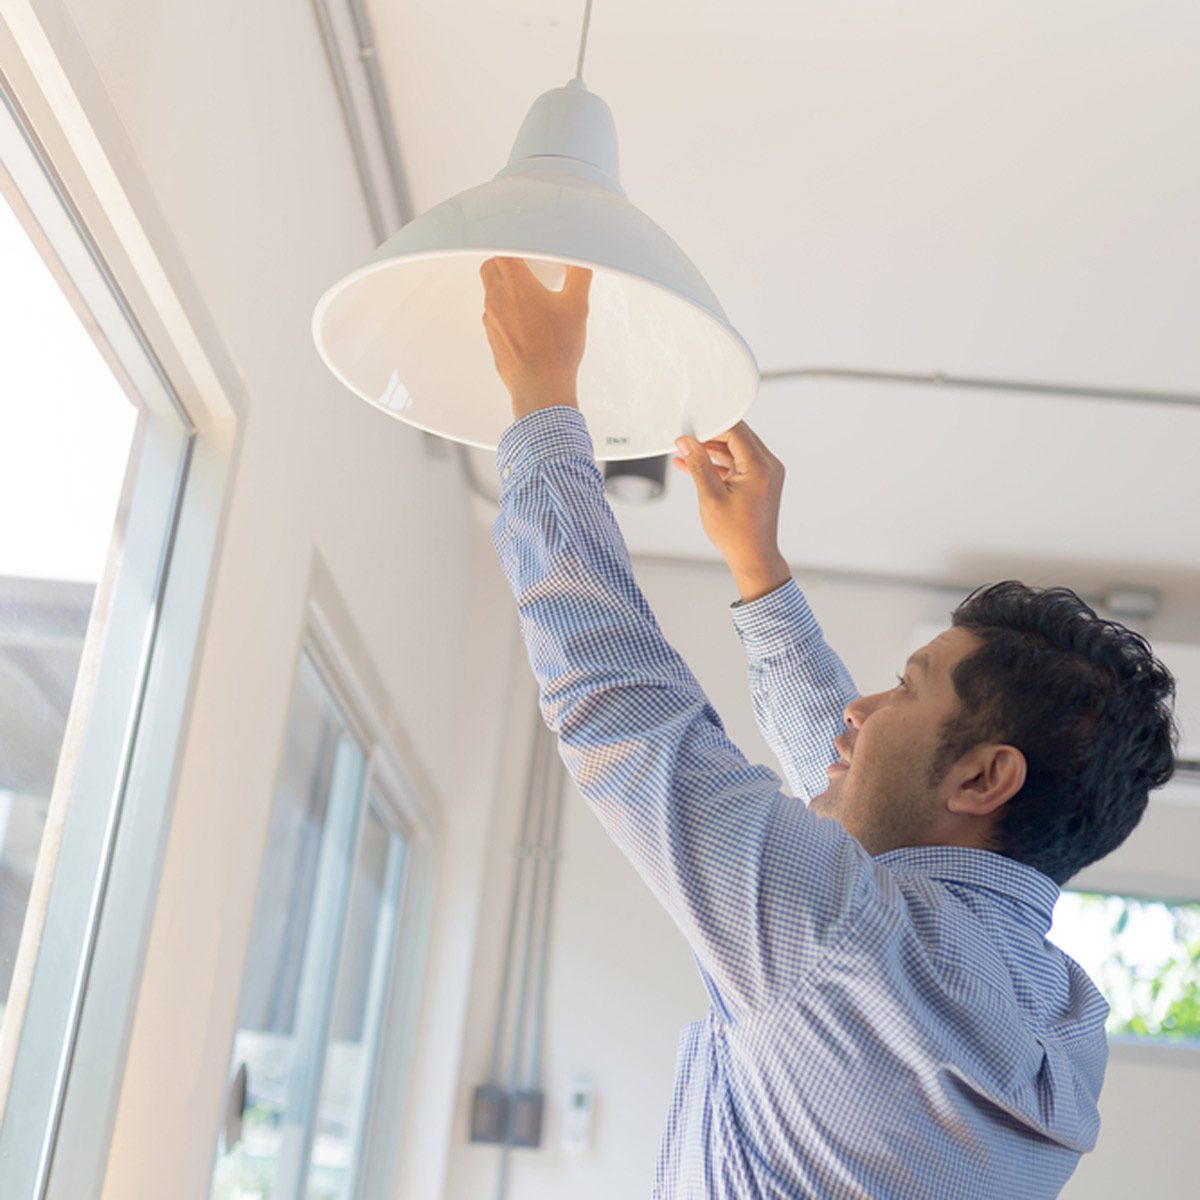 <h2>Don't Forget the Details</h2> <p>When buyers are looking at a home, they scrutinize the details. Do light fixtures work? What about appliances and doors? Are the <a href="https://www.familyhandyman.com/list/how-to-wash-windows/" rel="noopener noreferrer">windows clean</a>? Paying attention to these little details shows the buyer the home has been cared for and loved, increasing the home's value.</p>